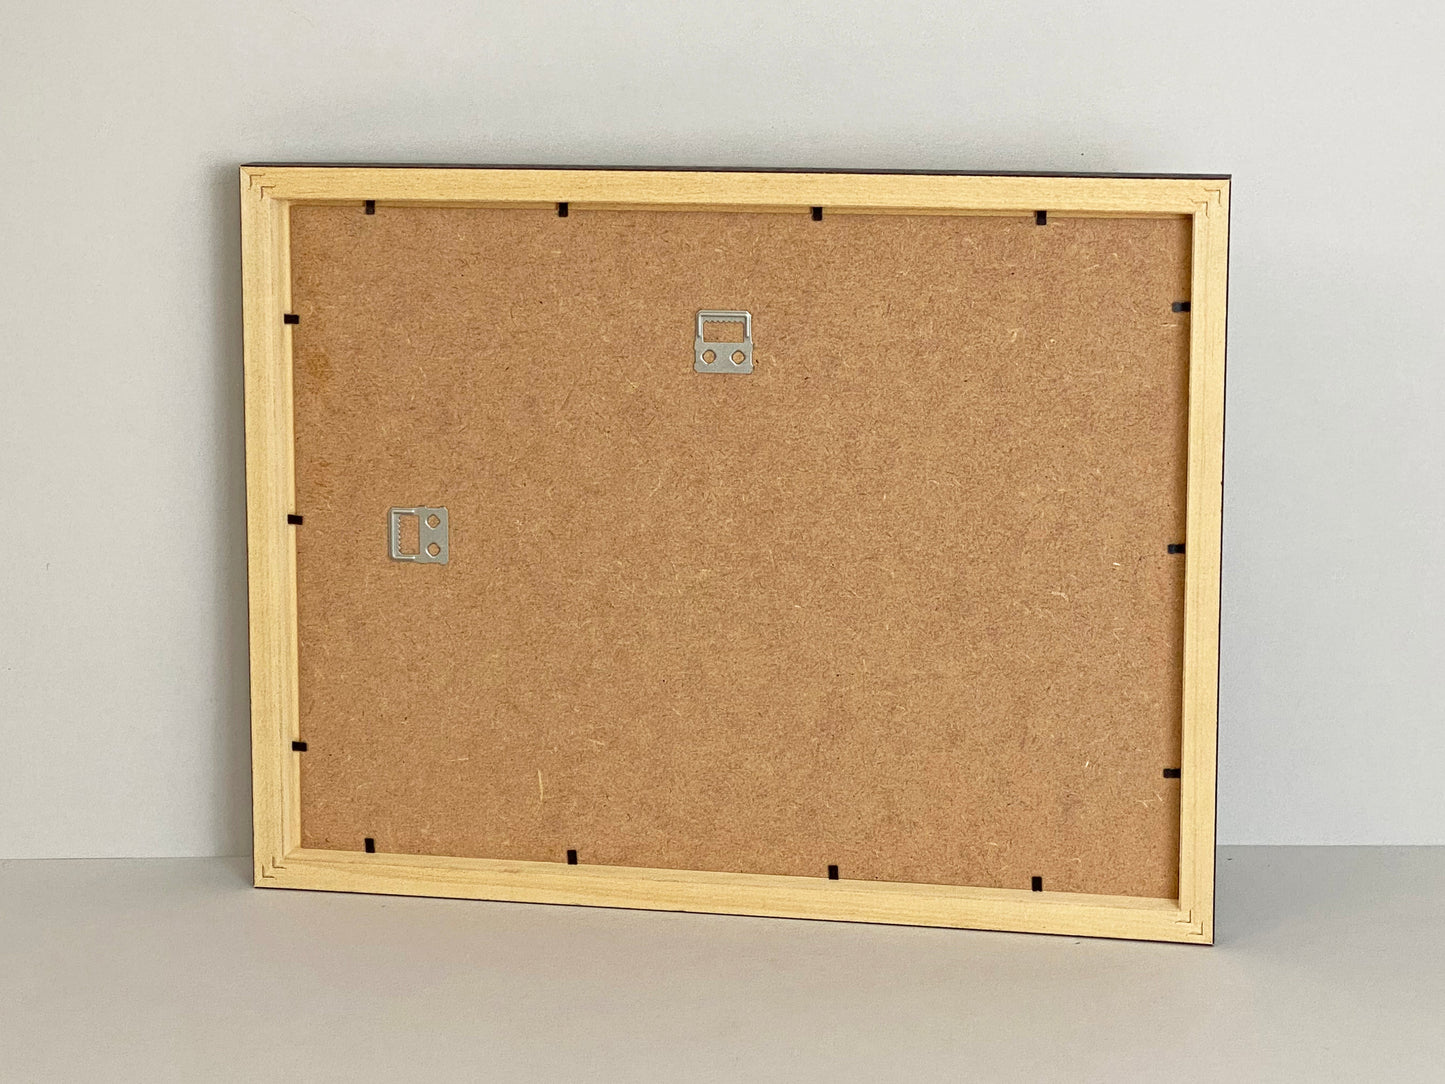 Multi Aperture Photo Frame. Holds Four A4 sized images/Certificates. 35x100. - PhotoFramesandMore - Wooden Picture Frames